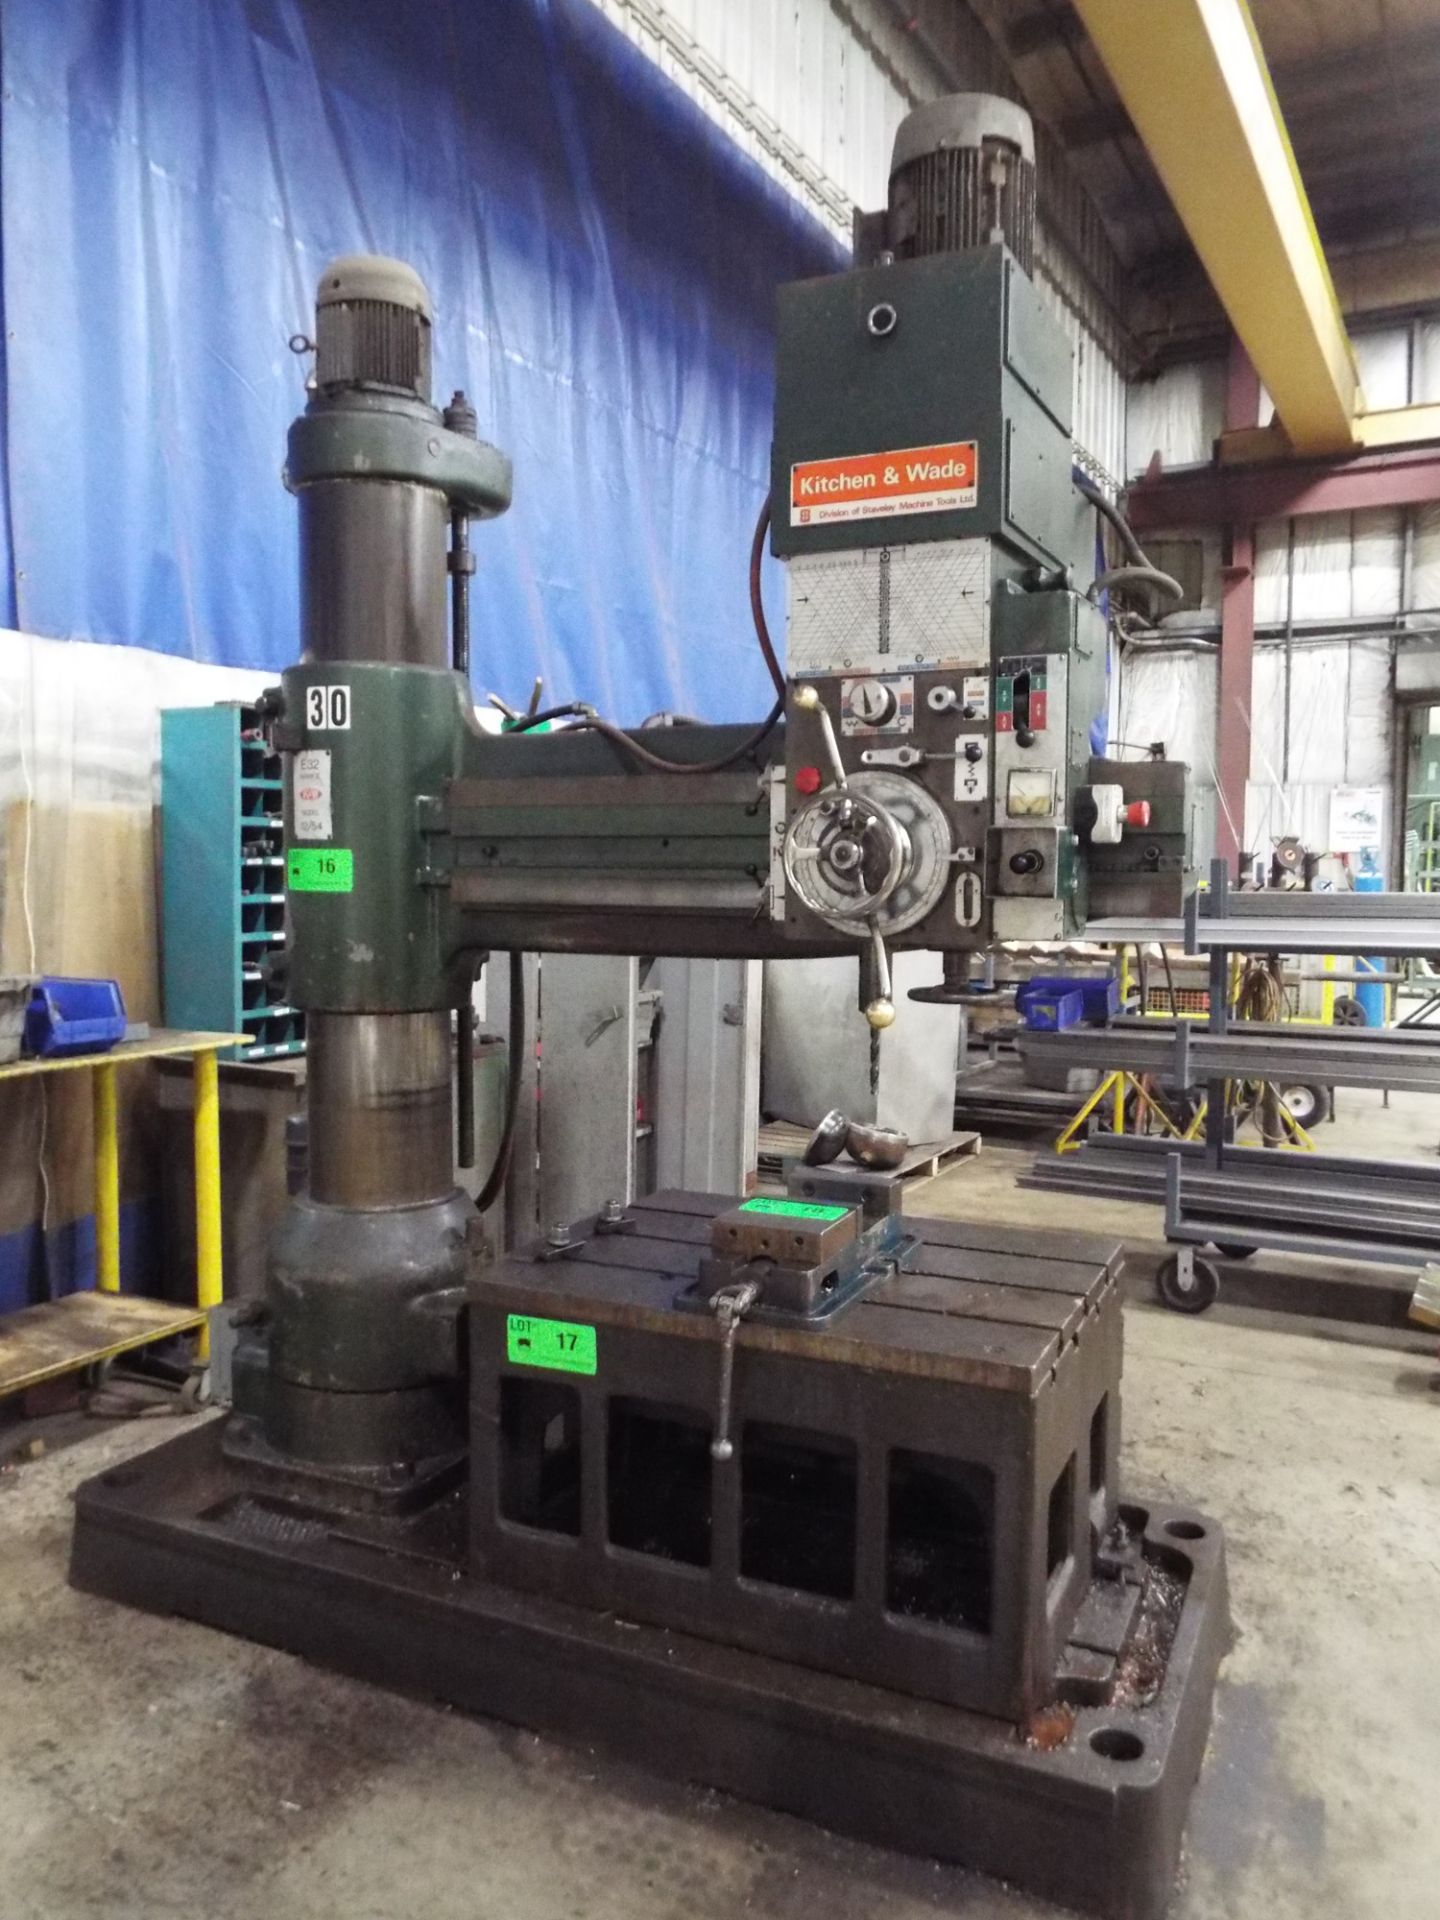 KITCHEN & WADE E32 MARK II MODEL 12/54 5' RADIAL ARM DRILL WITH 1600 RPM, 28" COLUMN TRAVEL, S/N: